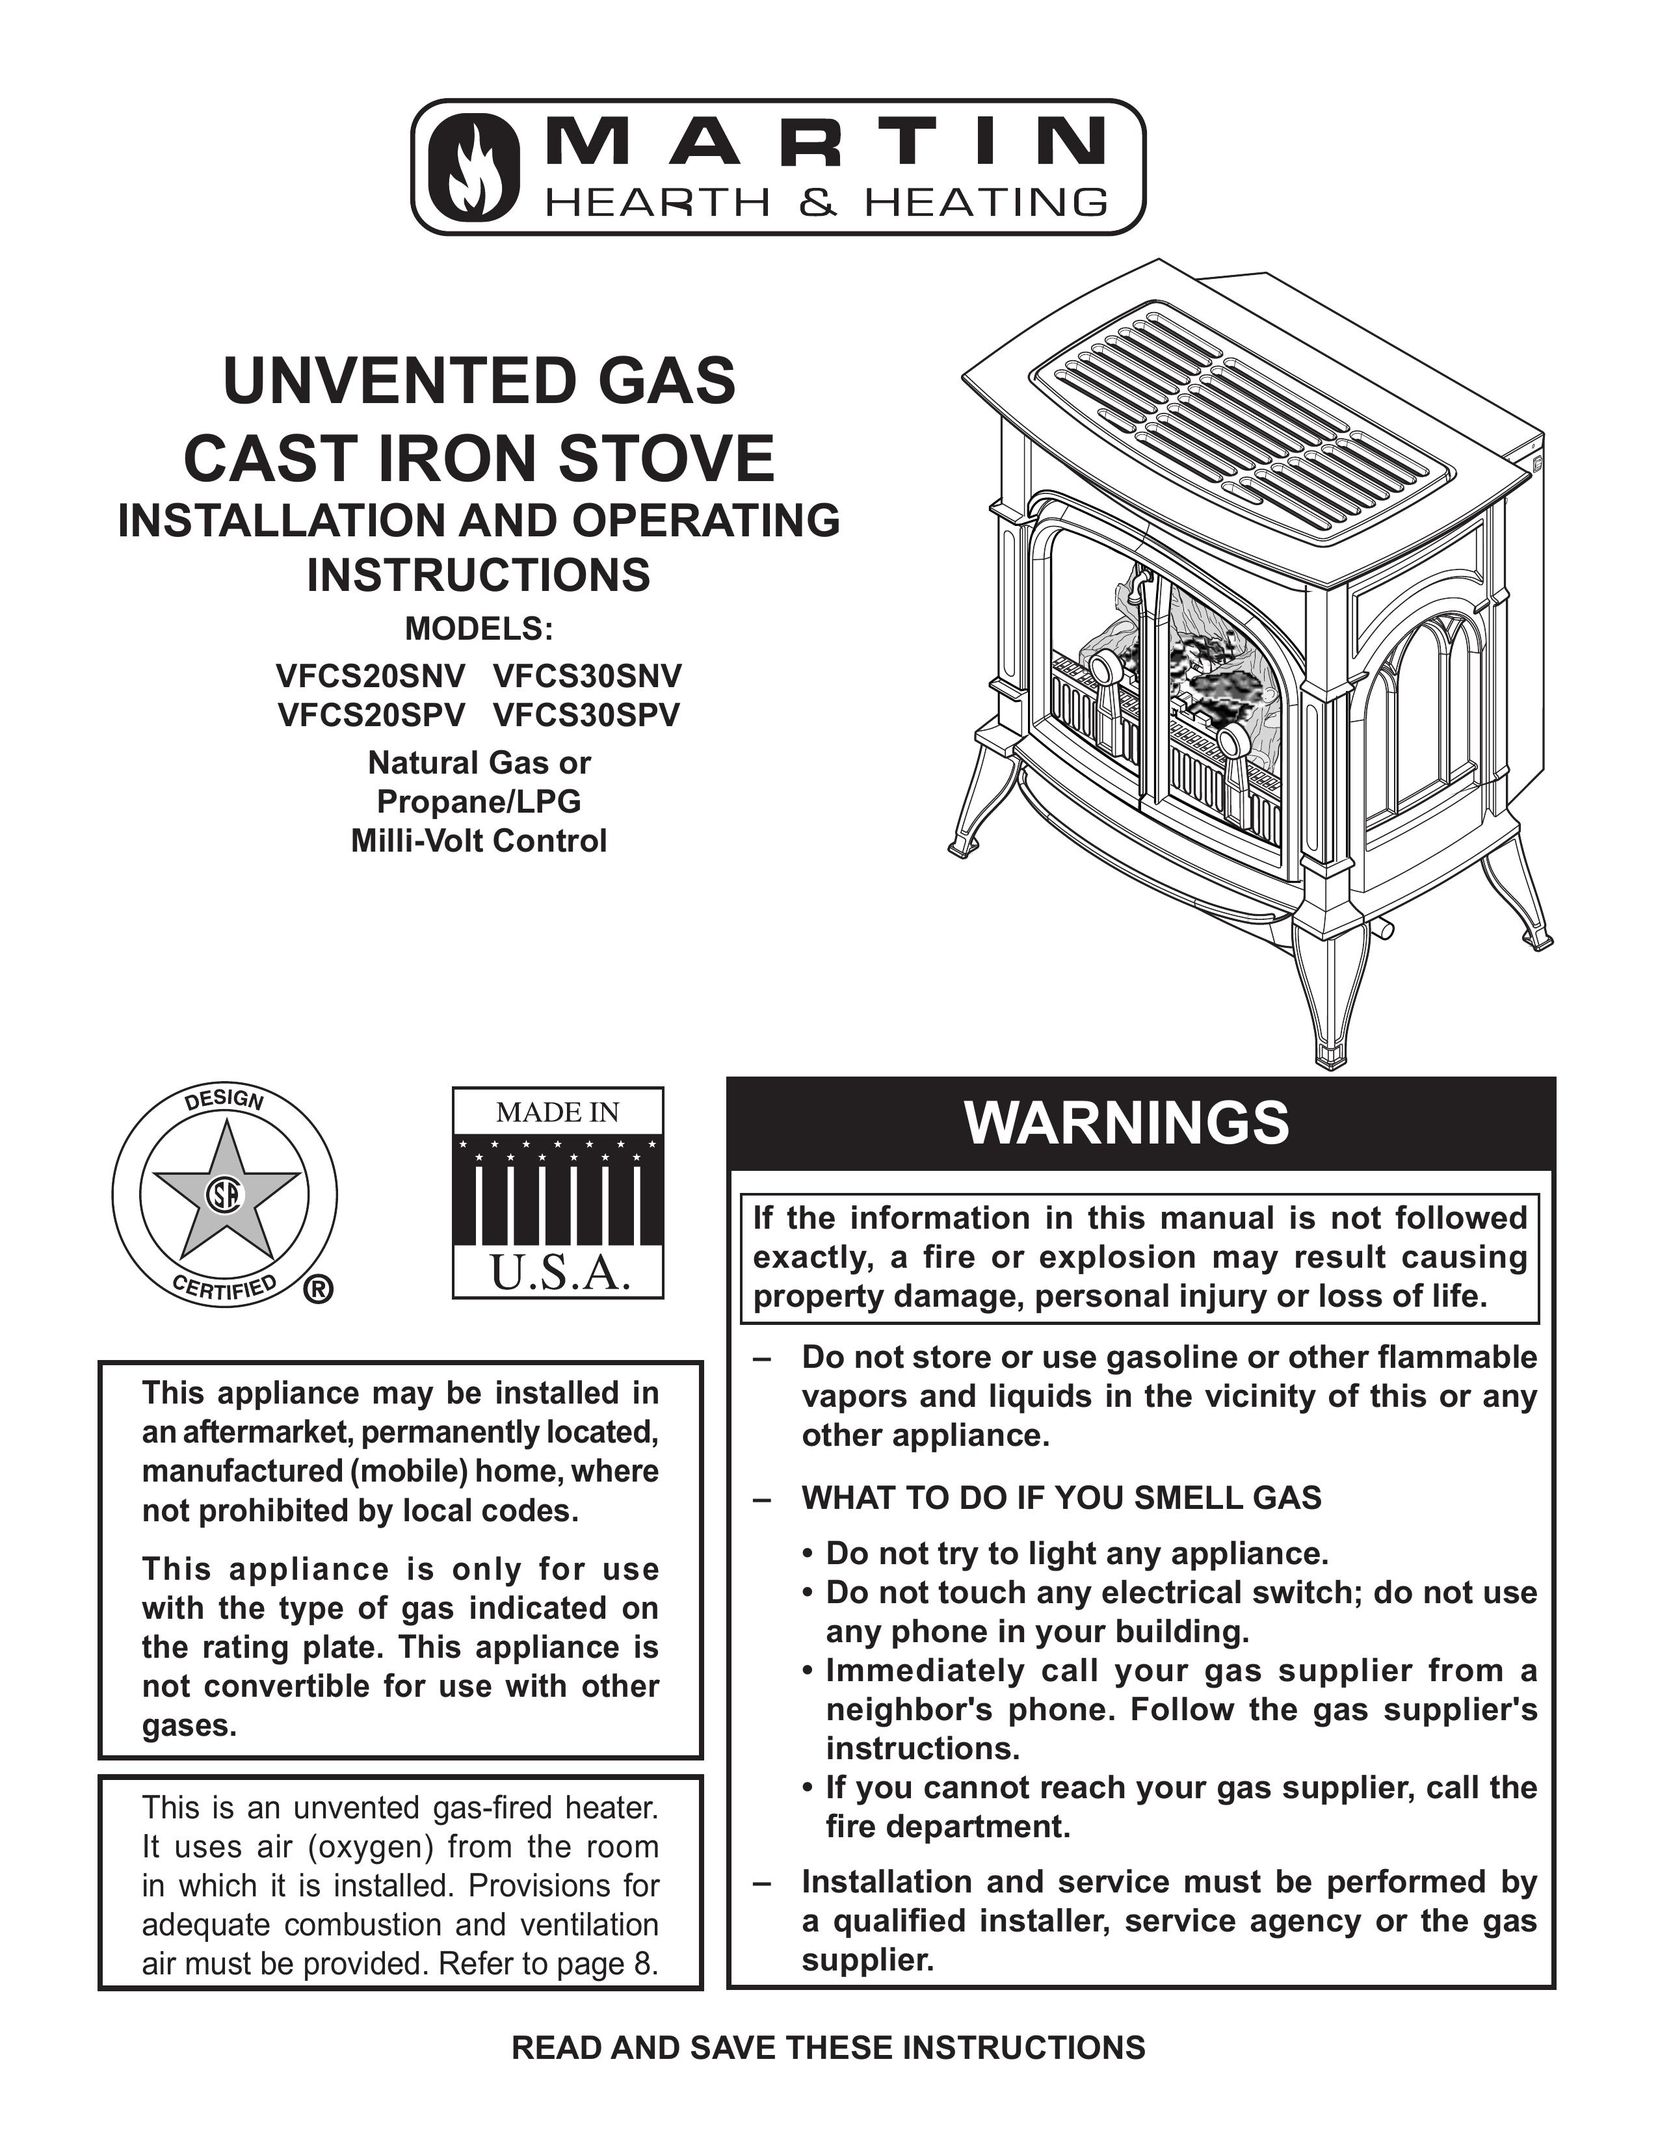 Martin Fireplaces VFCS30SNV Stove User Manual